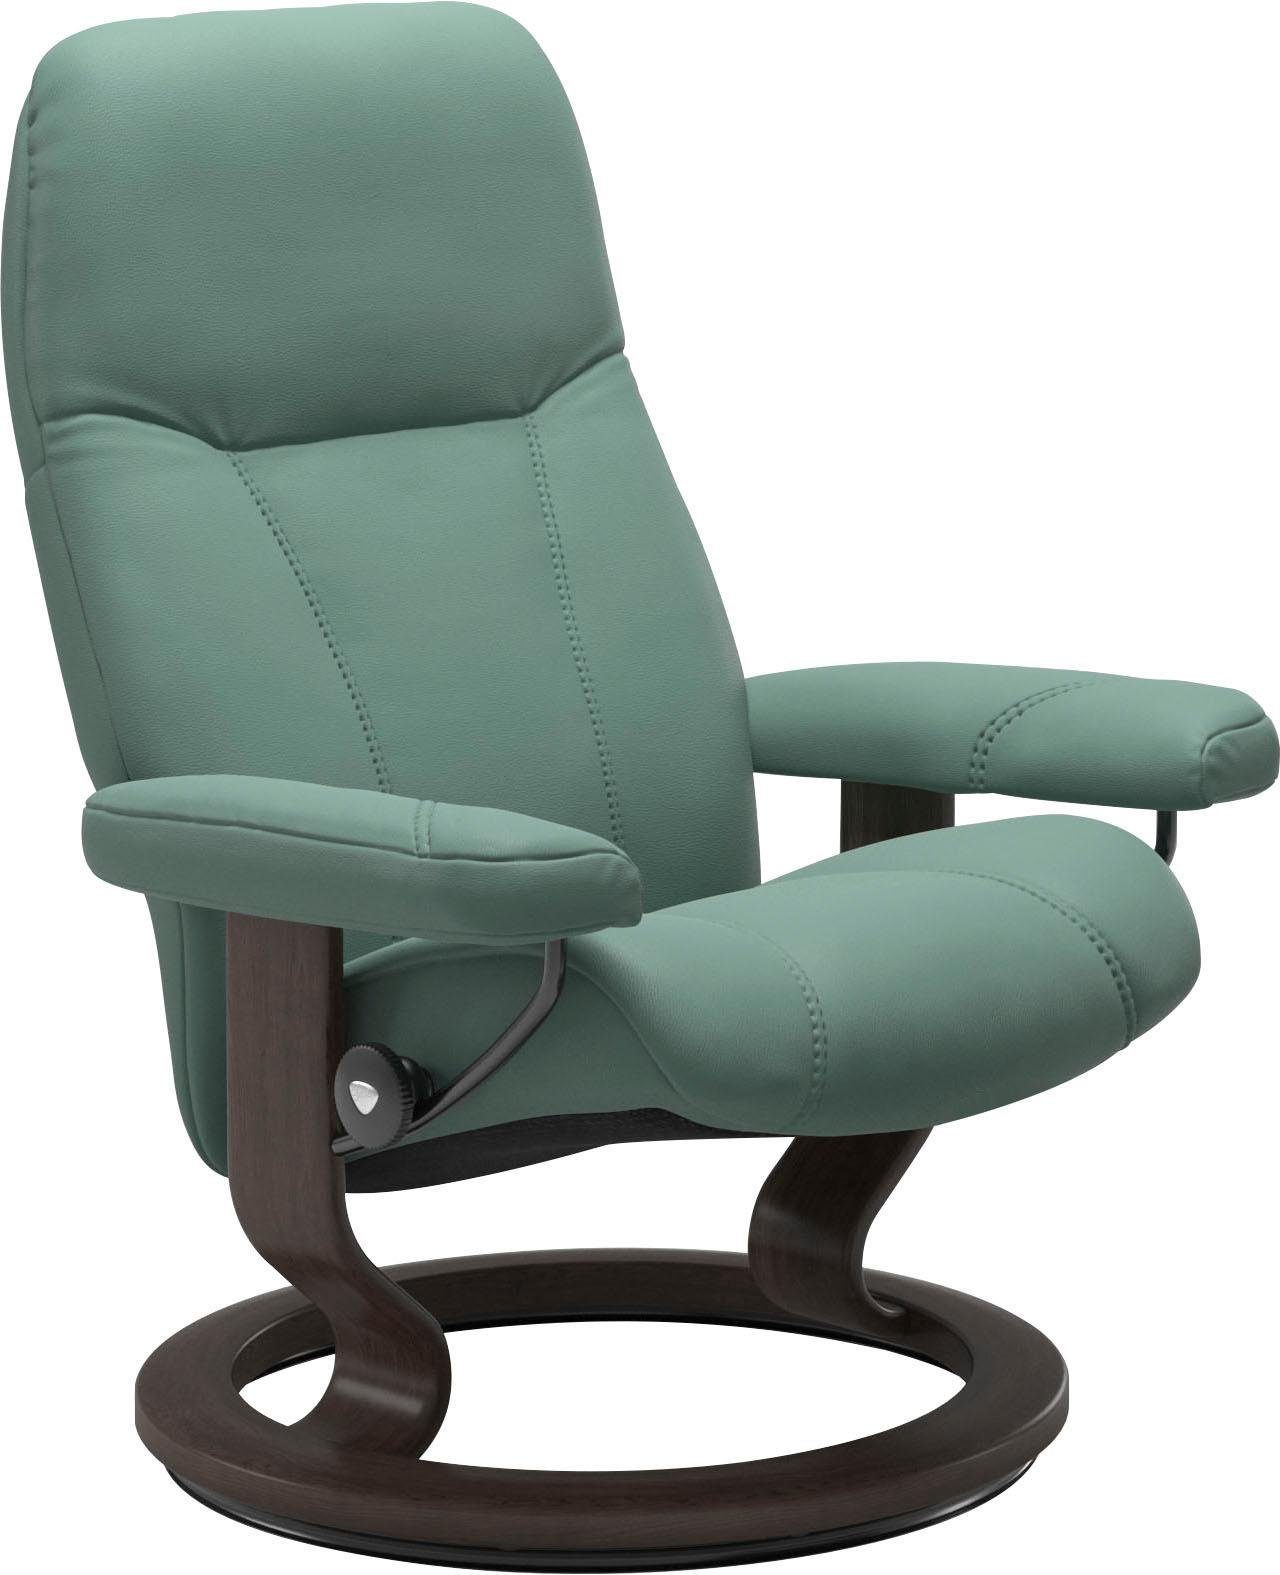 Stressless® Relaxsessel Classic mit Consul, Base, Gestell Wenge Größe M